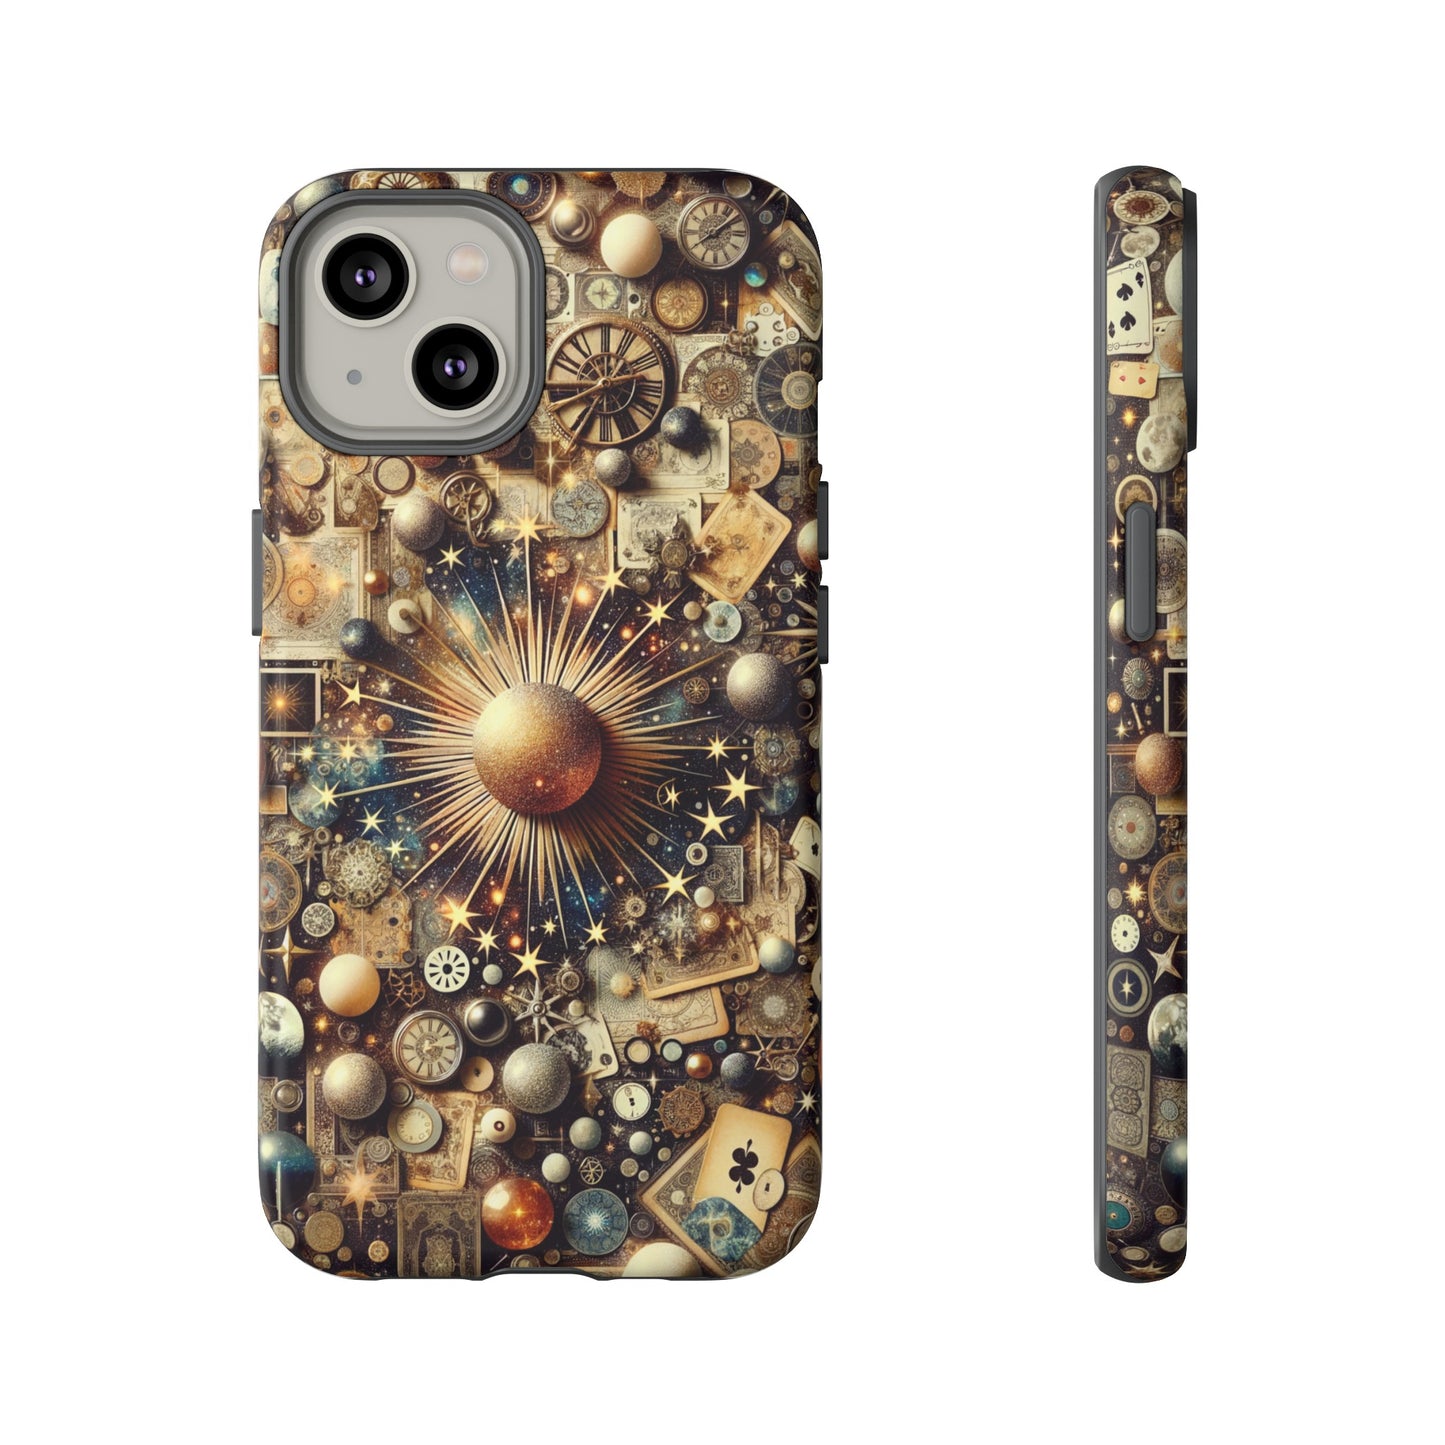 Celestial Collage Phone Case with Suns Stars Moons Cards Keys and Trinkets- Phone Case